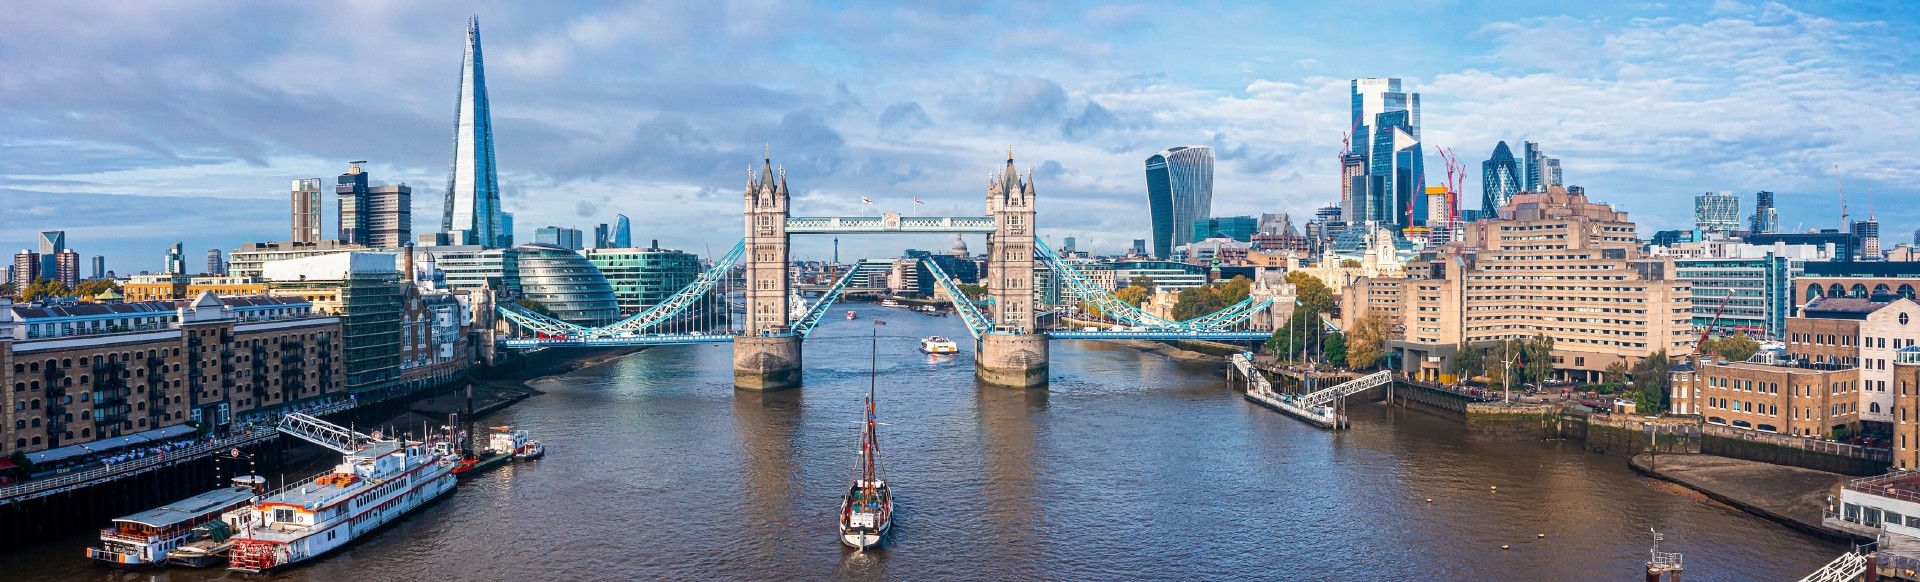 An aerial view of Tower Bridge with a boat passing through on the river Thames, and The Shard and City of London in the distance 